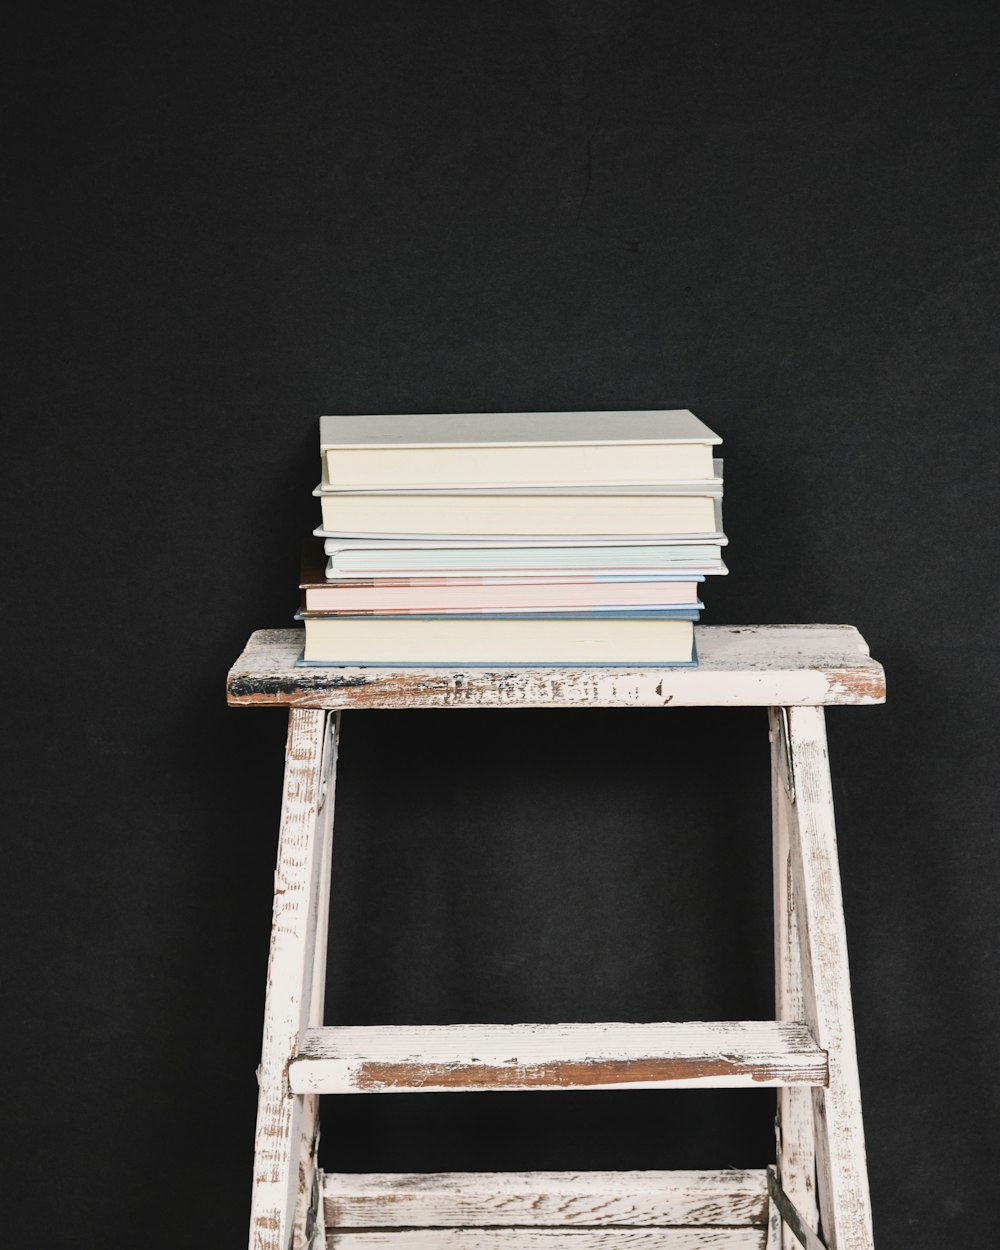 a stack of books in a wooden box